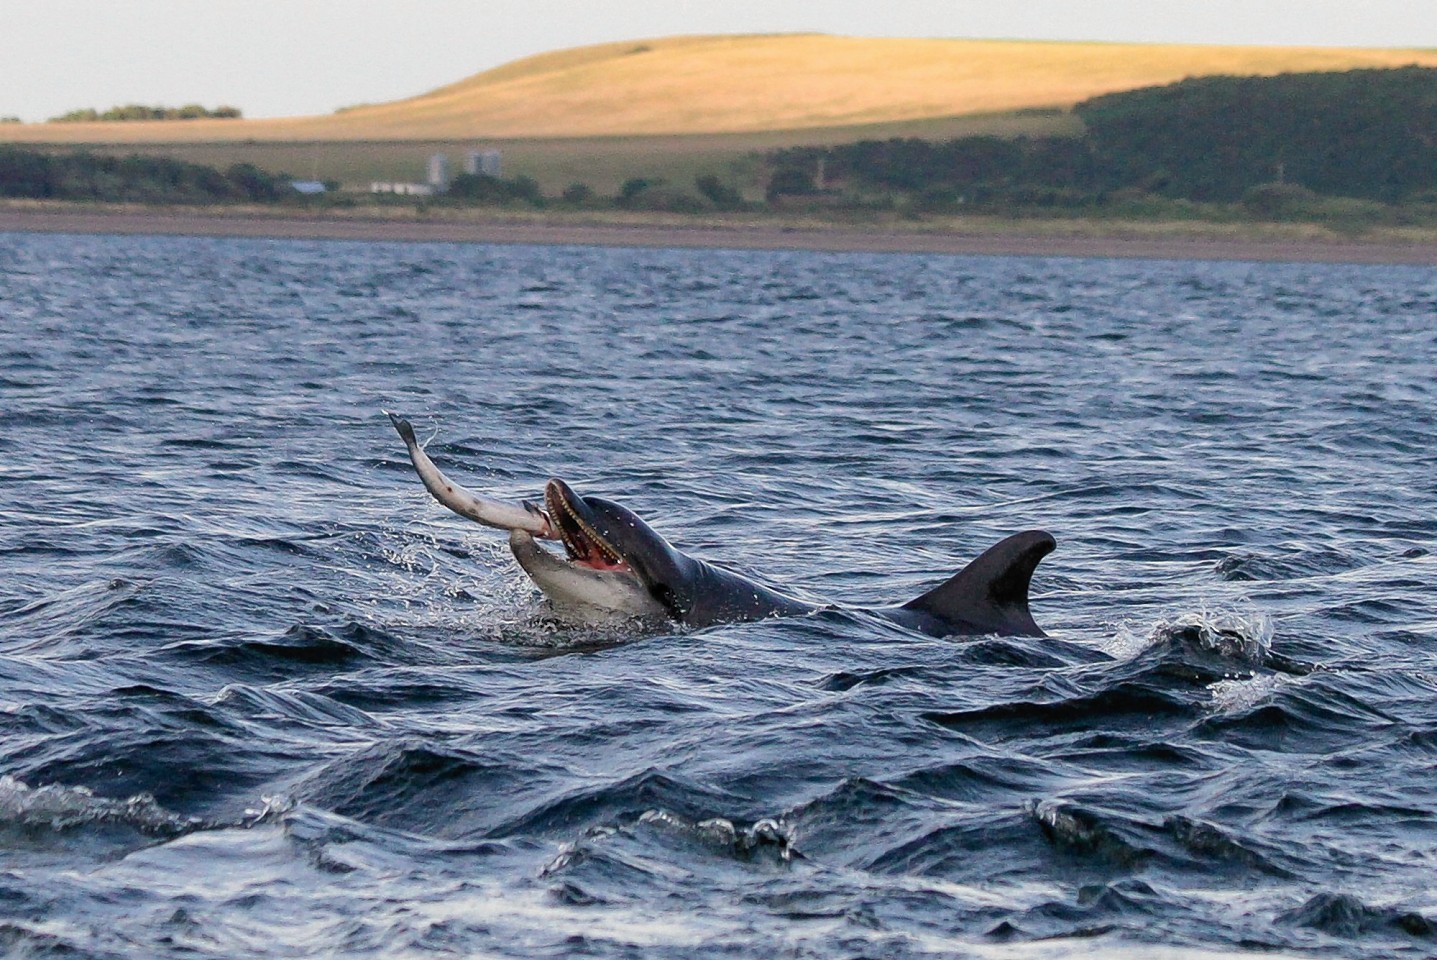 The bottle nose dolphin plays with his food as he jumps and catches a salmon